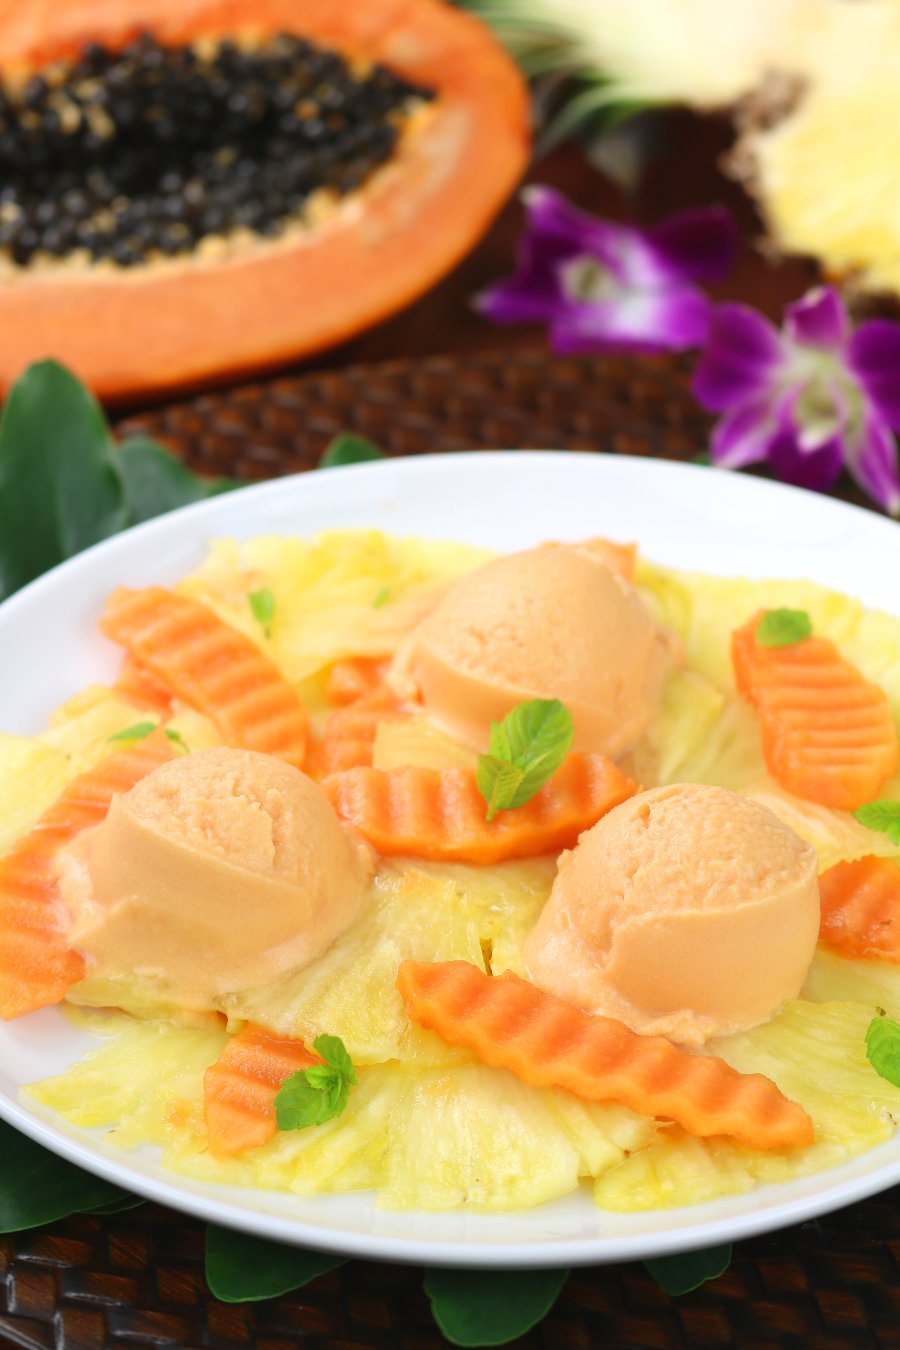 Fragrant tropical fruit blended with creamy coconut milk creates this sweet, cool, and refreshing Papaya Pineapple Sherbet.